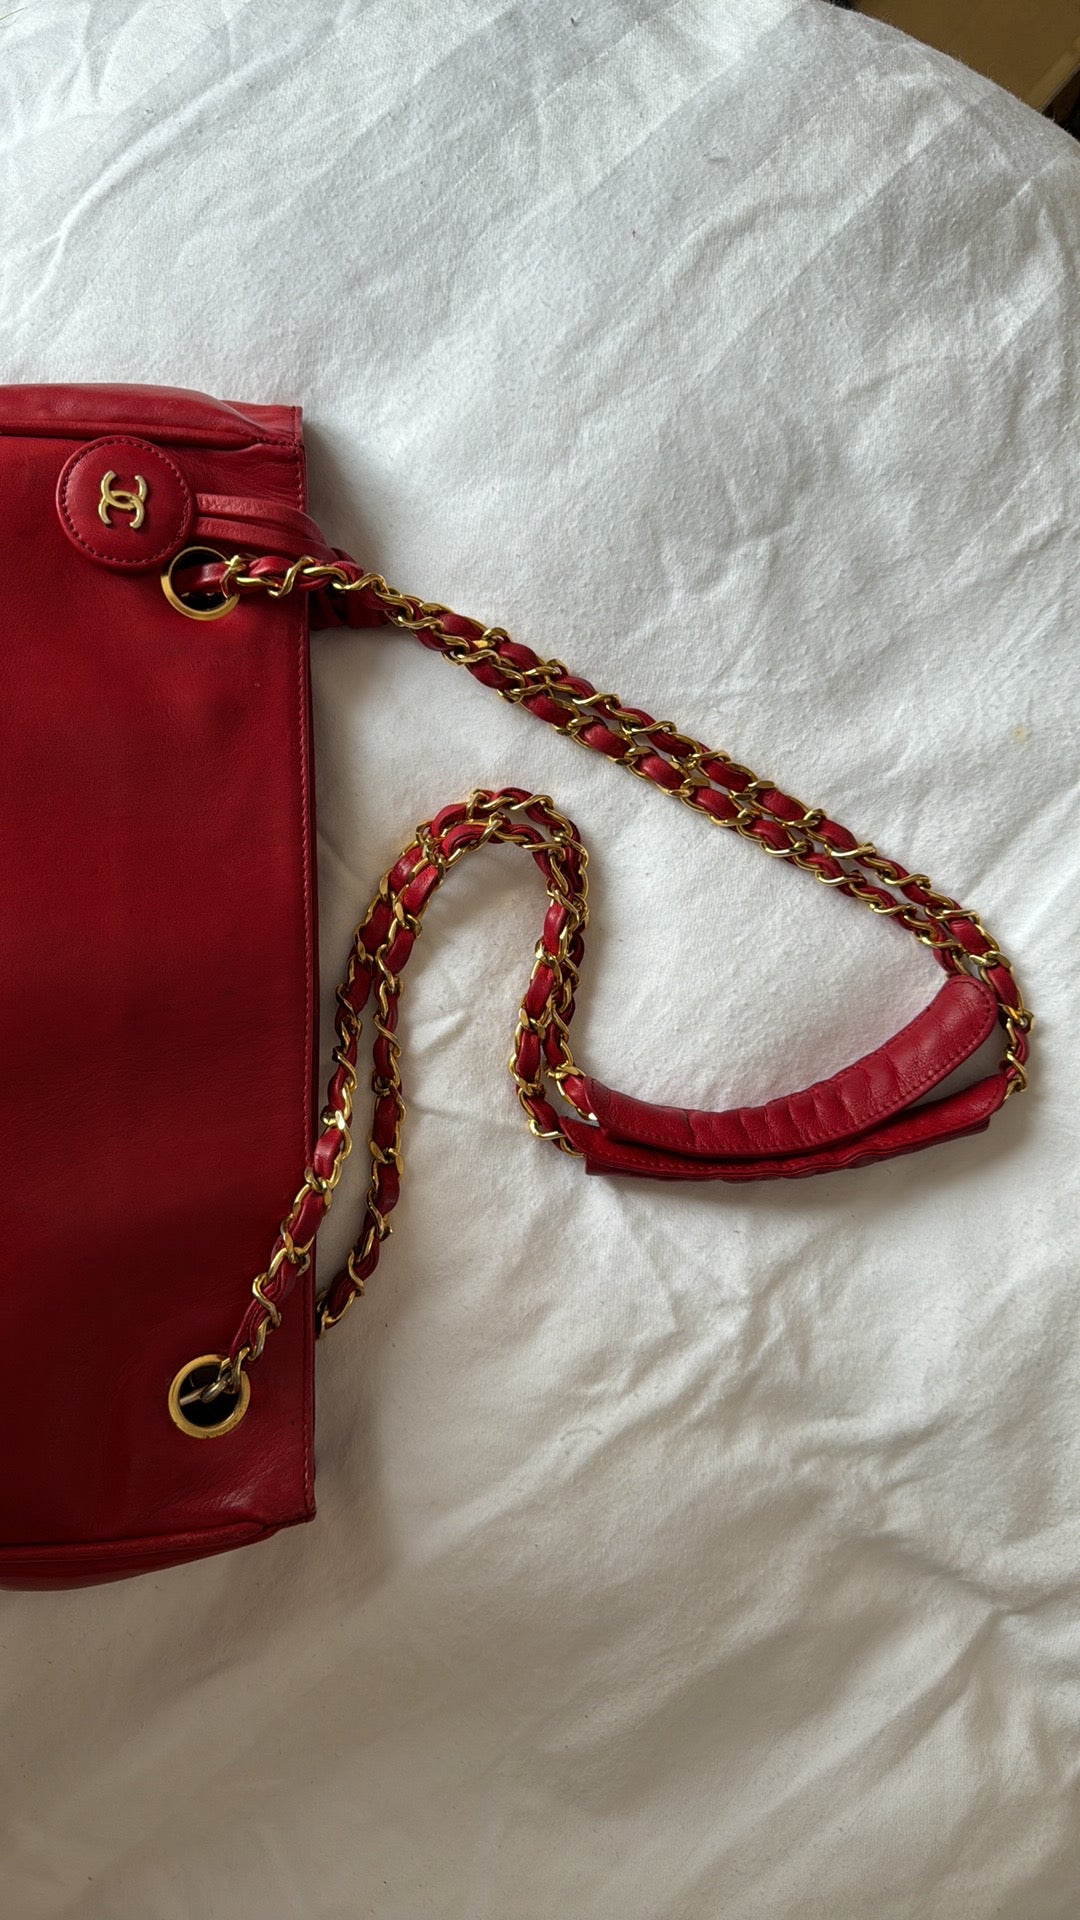 Vintage Chanel Symbol Tote Red Lambskin 💯 Authentic